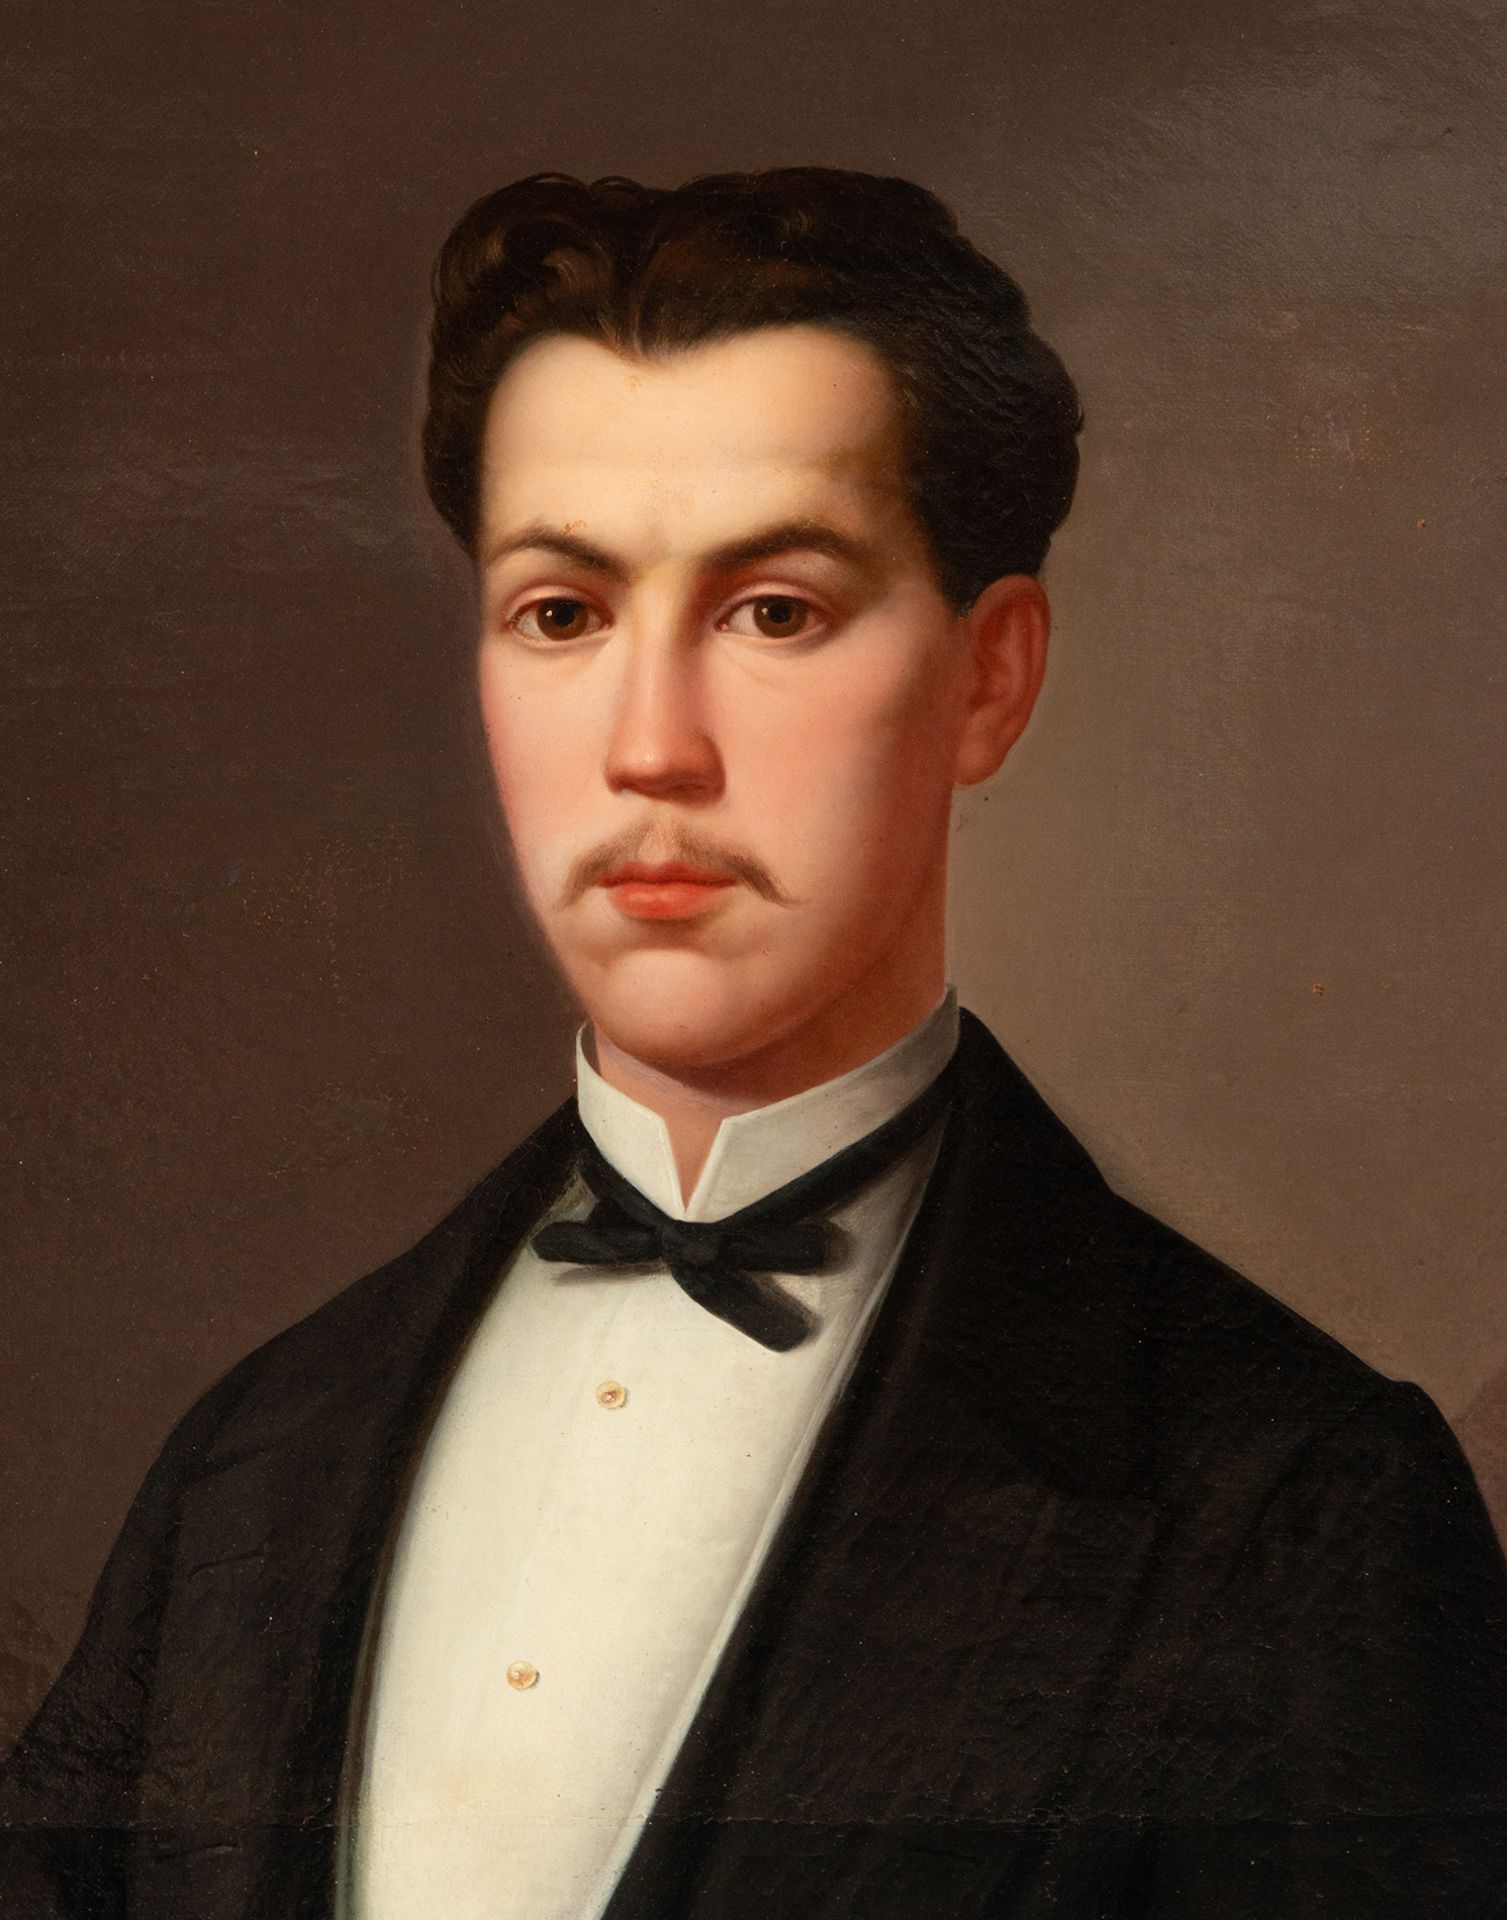 Portrait of a 19th century Gentleman, signed and dated Augusto Manuel de Quesada, 1878 - Image 2 of 2